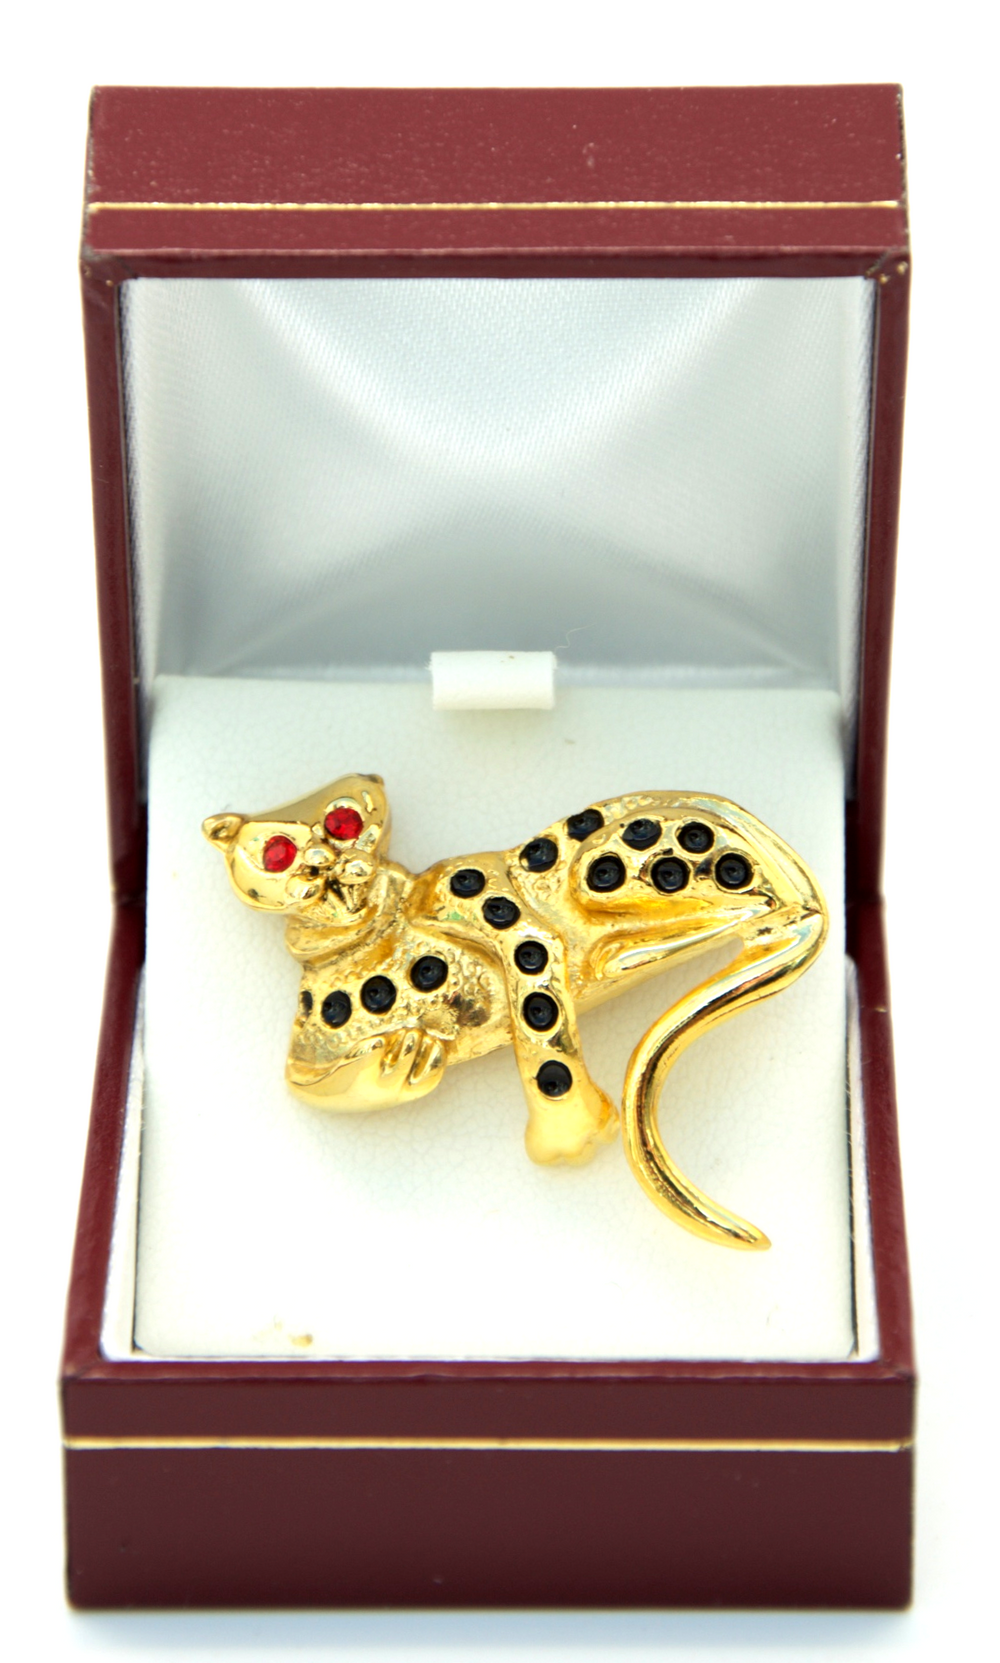 Set of 3 Cat Gold Crystal Brooches / Scarf Pins - Leopard, Trio of Cats, Cat Hunching - Gift Set